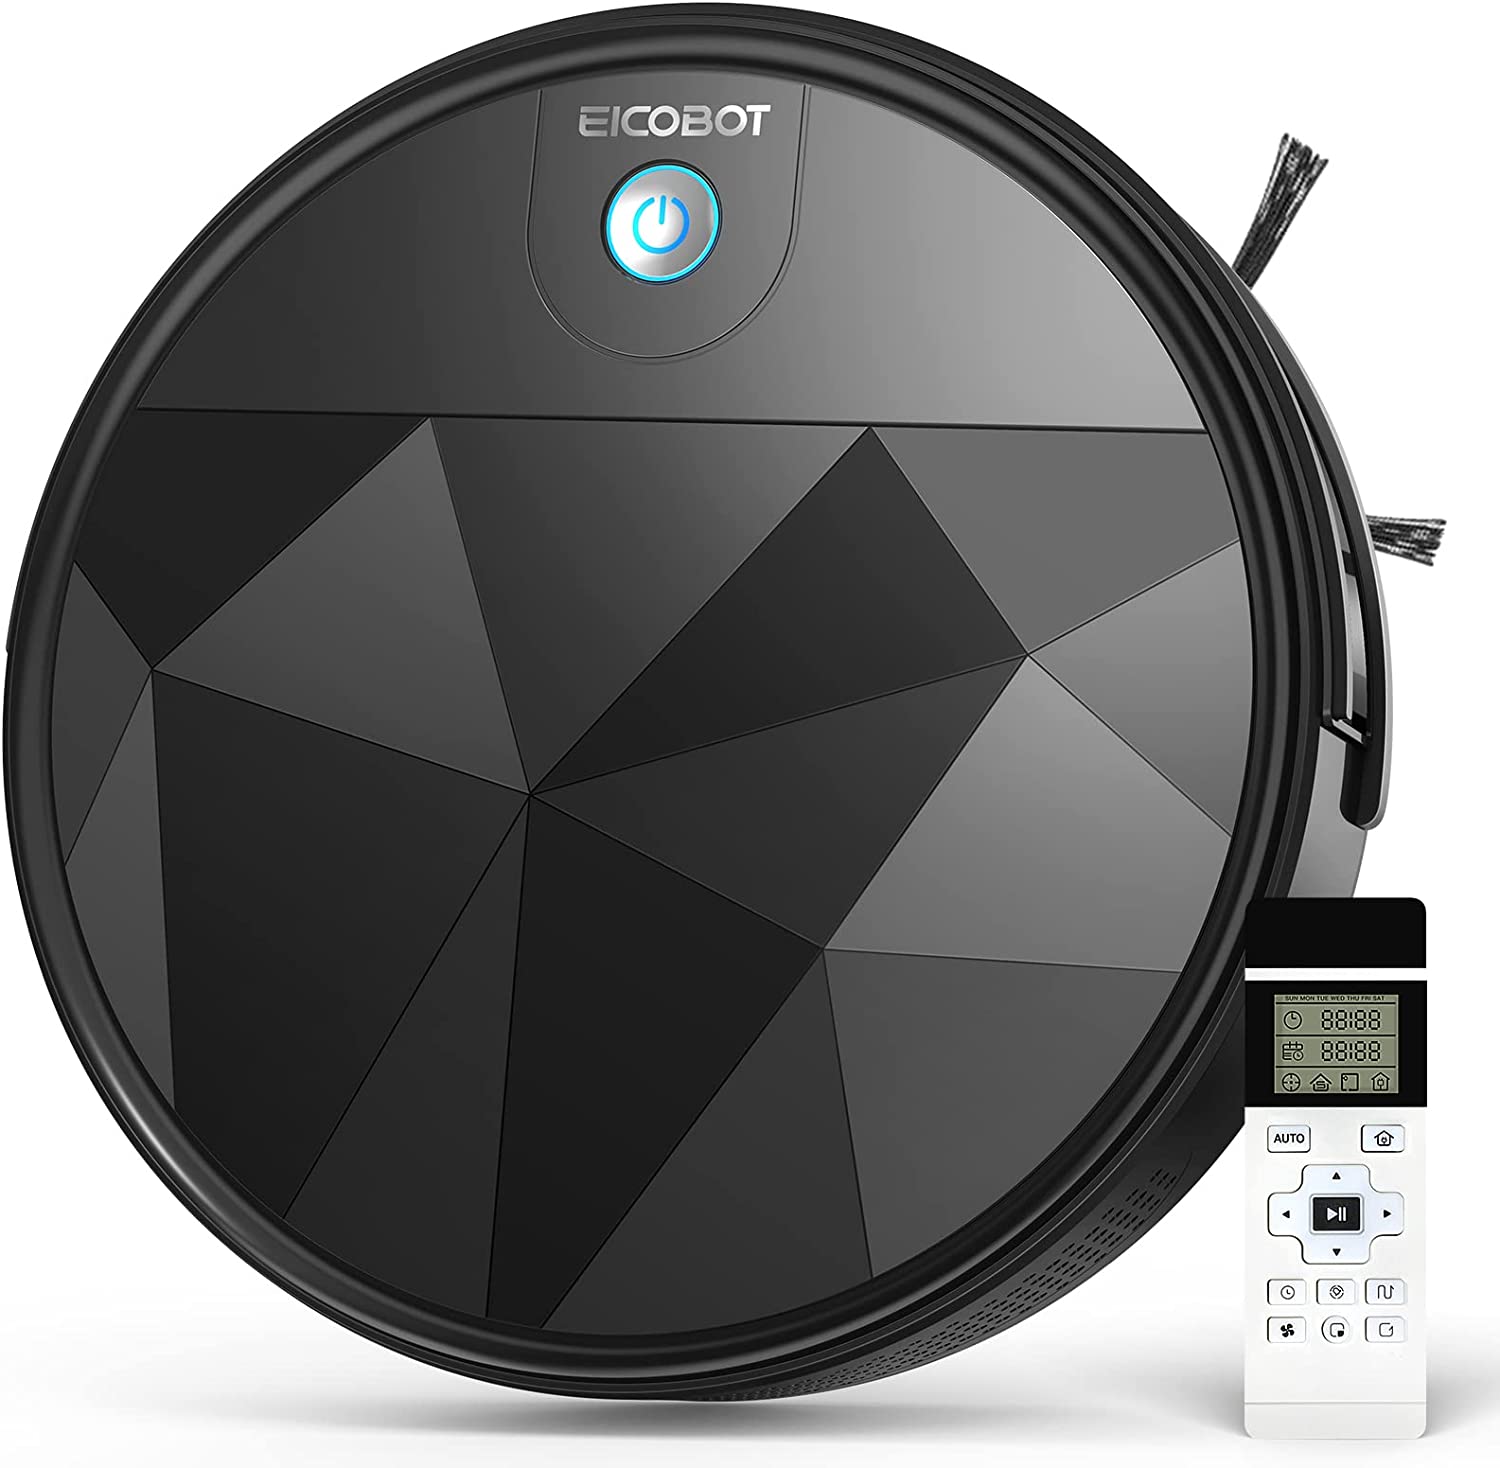 Read more about the article EICOBOT R20 Review